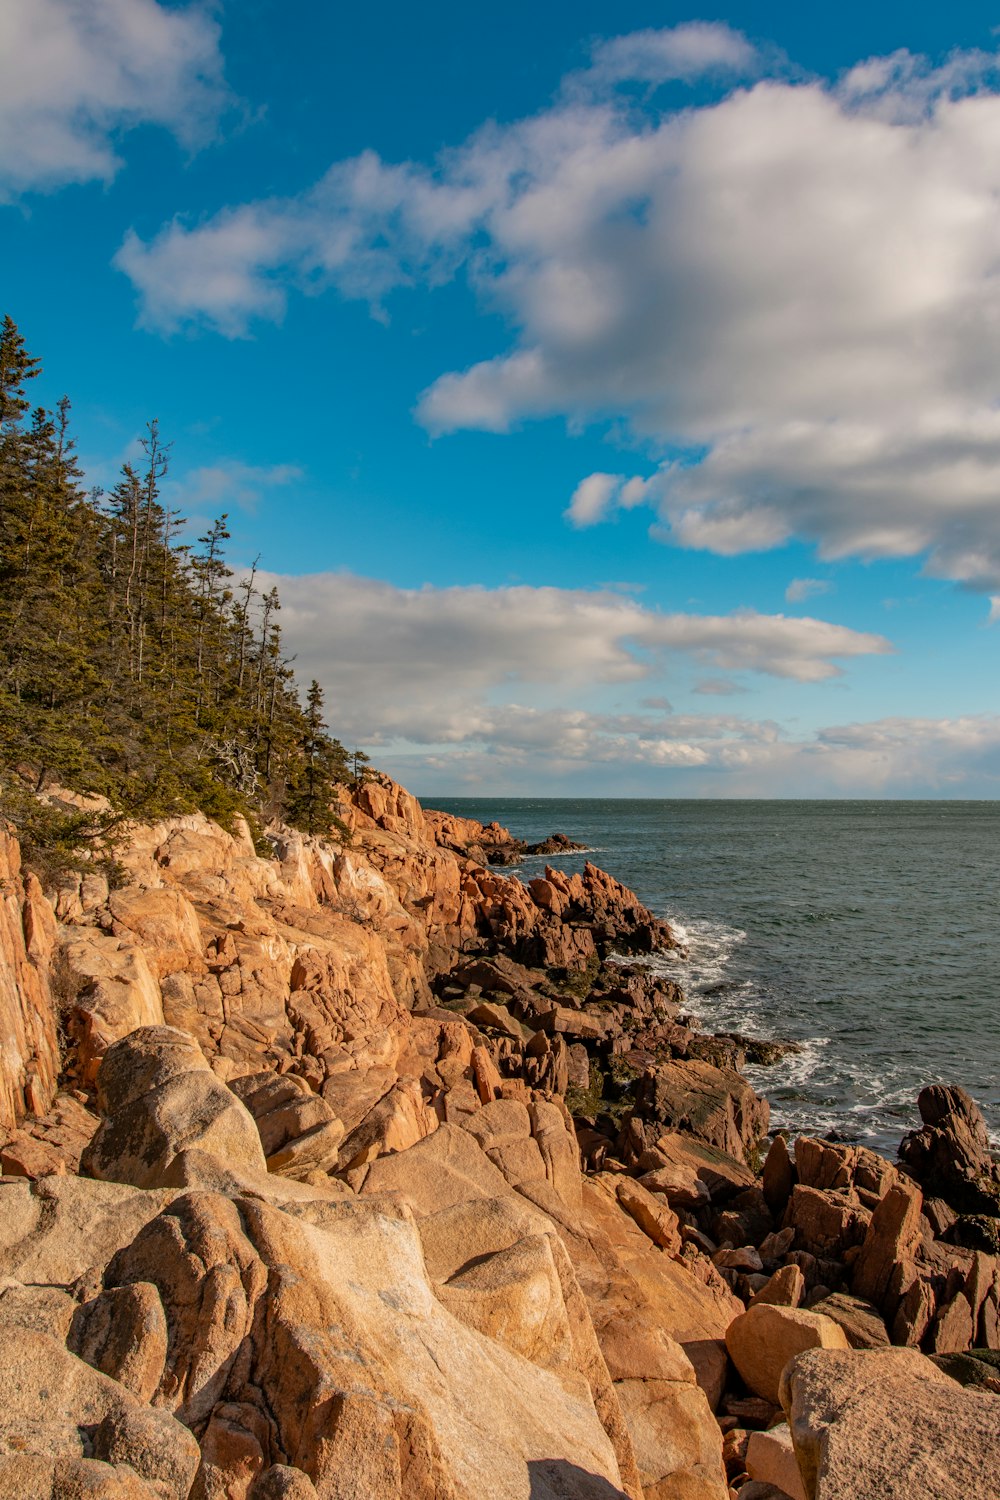 brown rocky shore with green trees and blue sea under blue sky and white clouds during